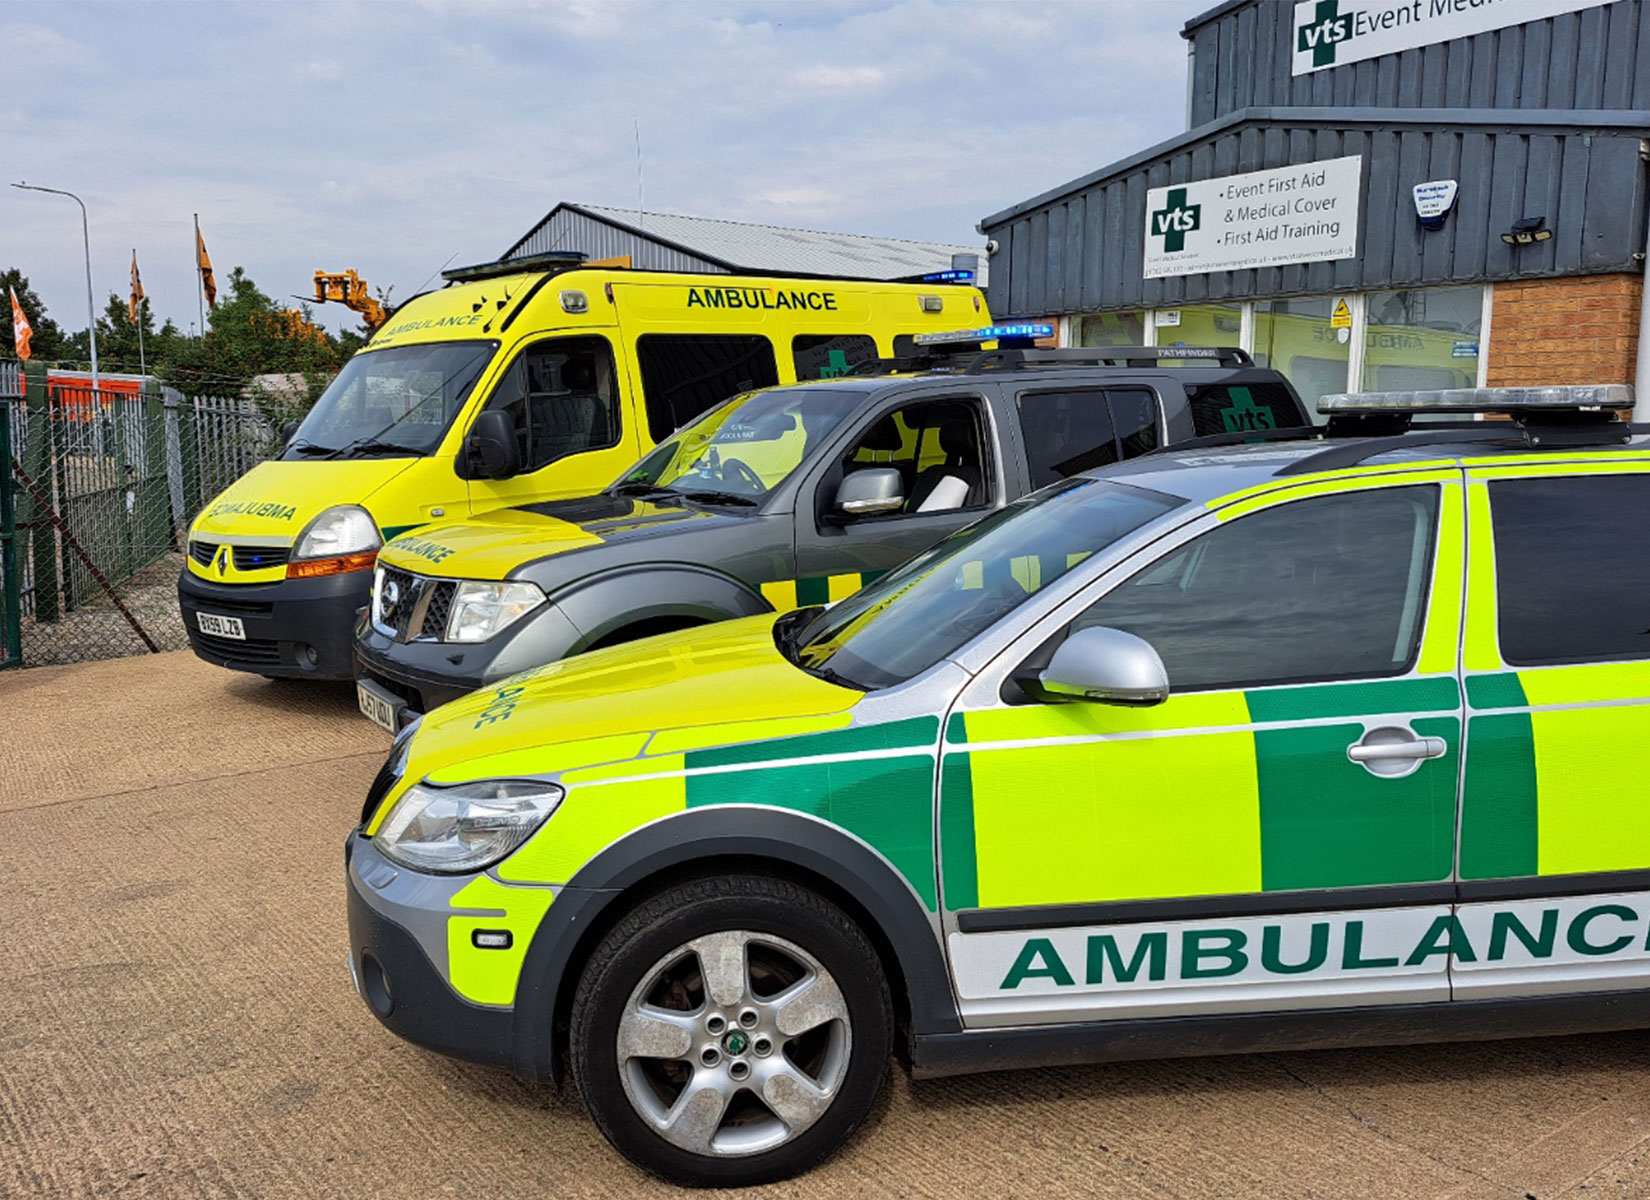 Rapid Response Vehicles - VTS Event Medical Services